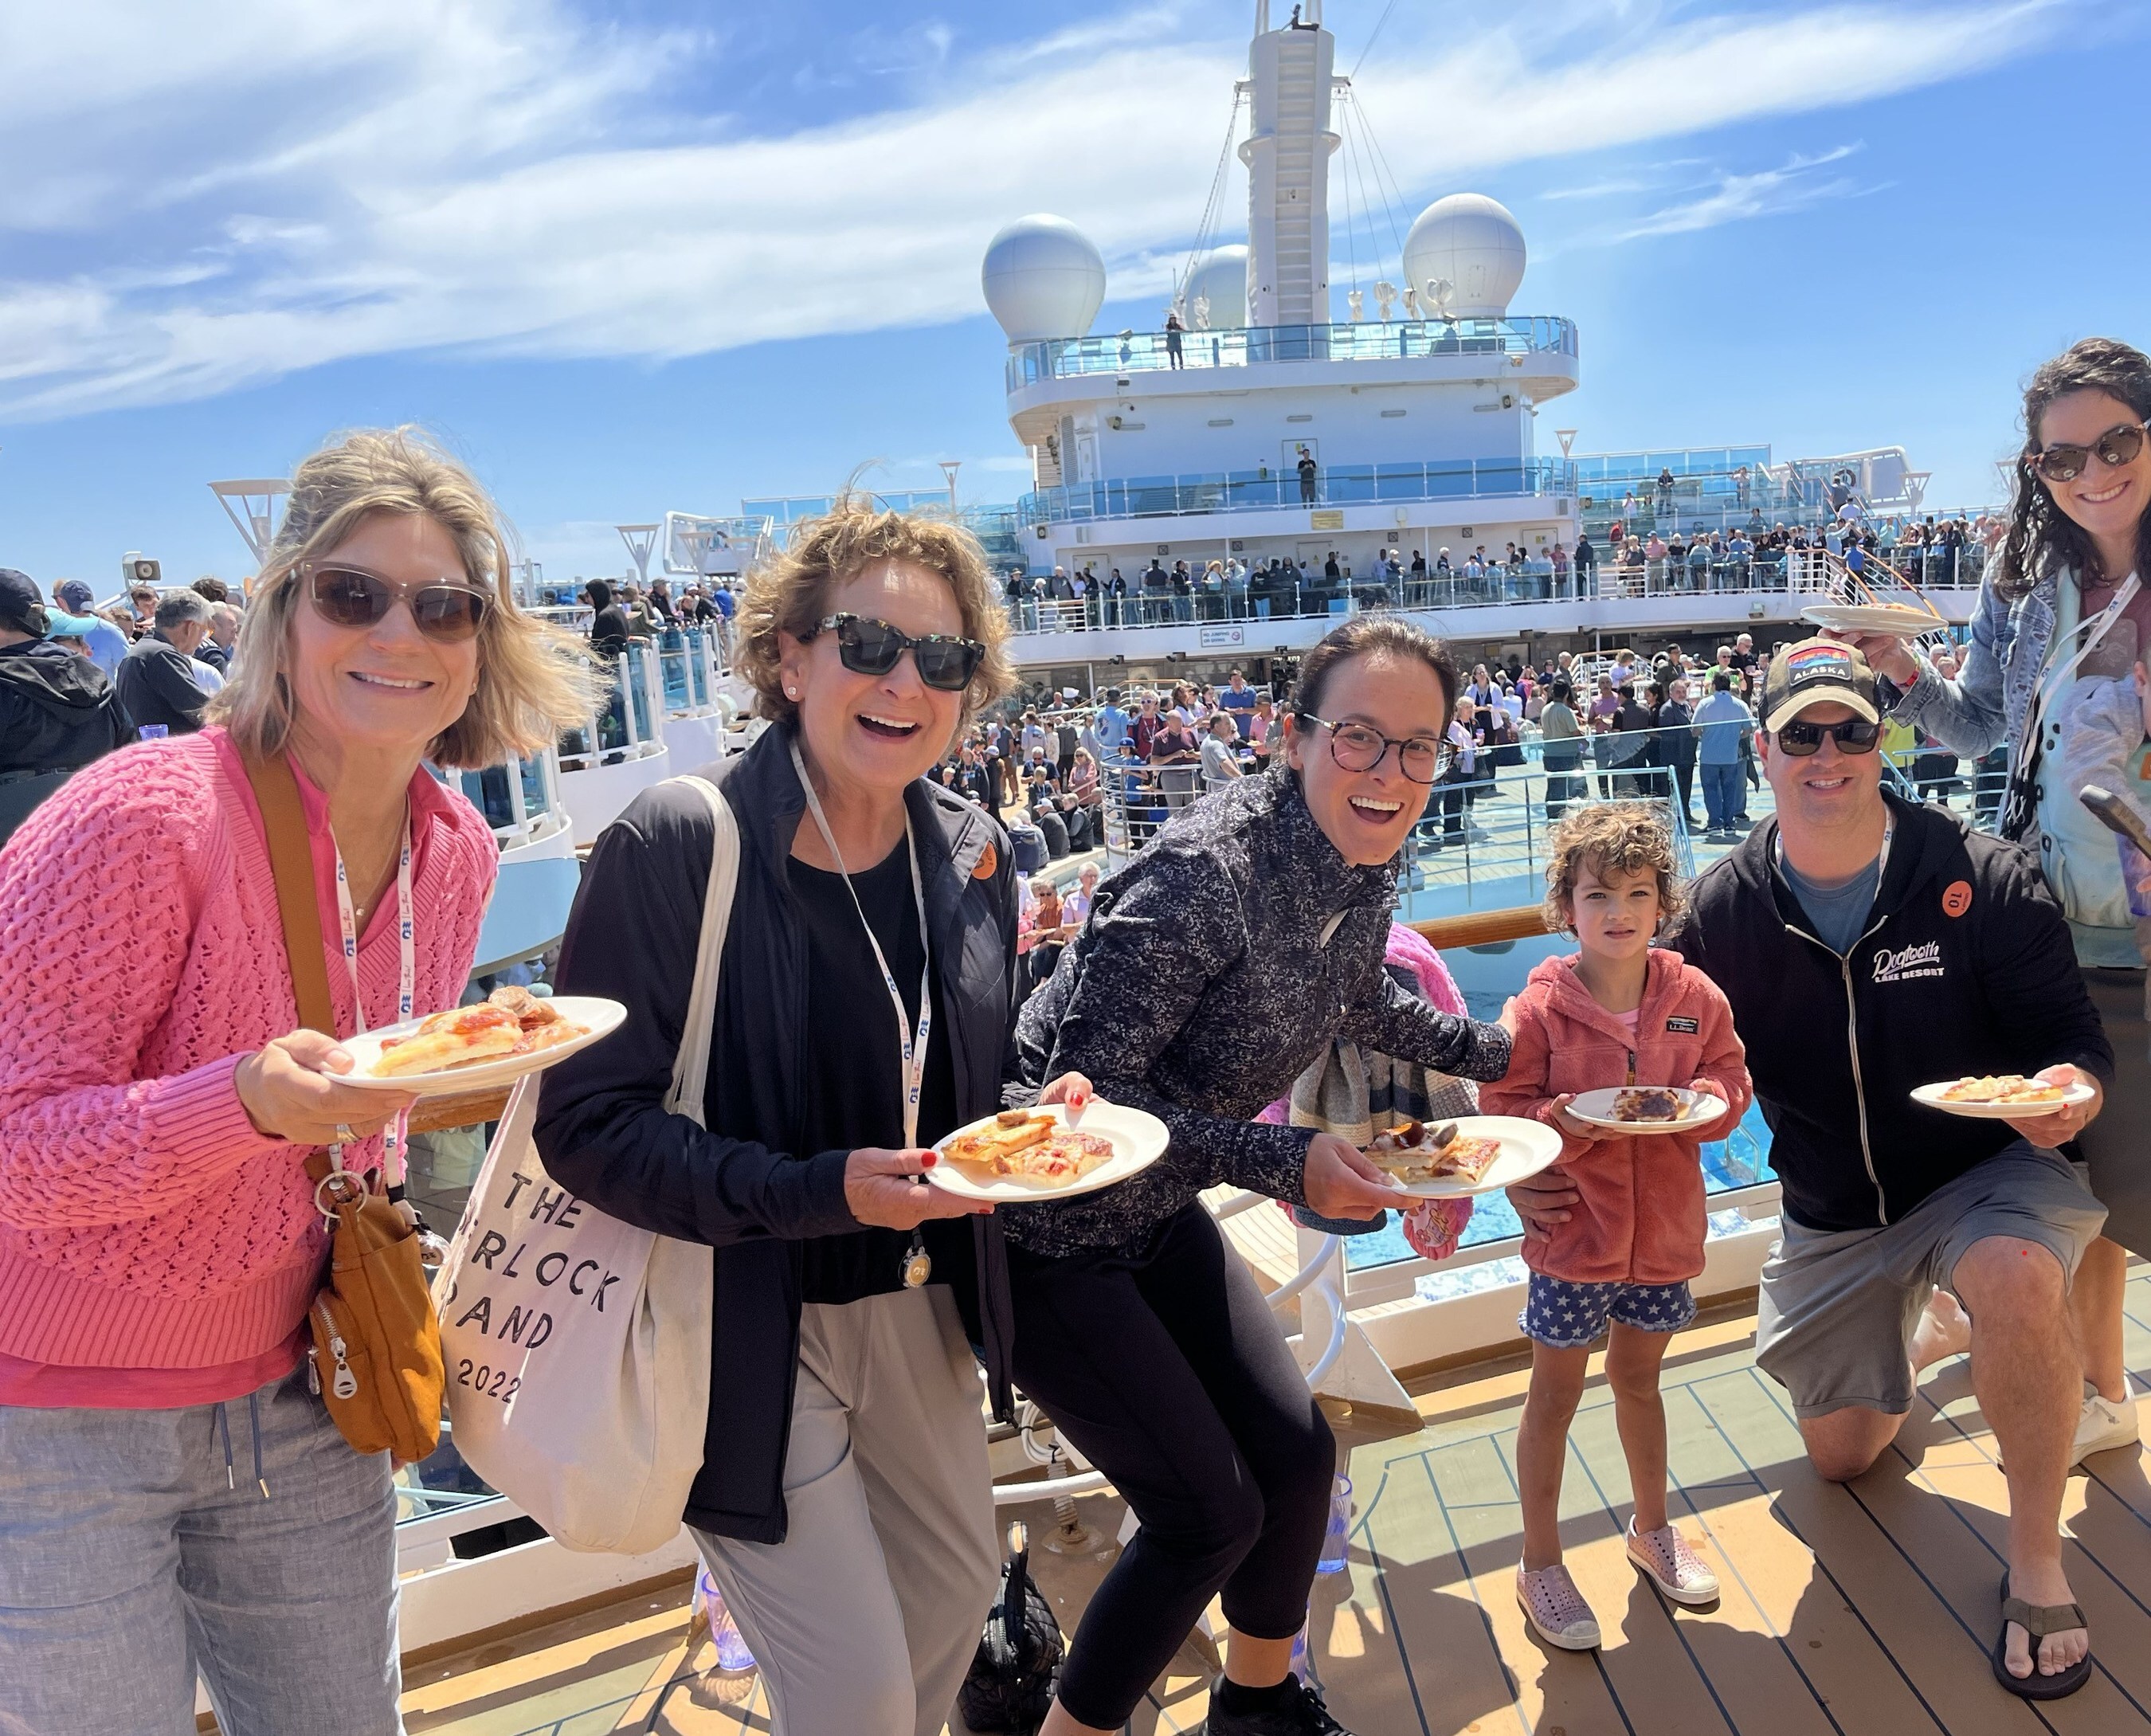 Princess Cruises Sets New GUINNESS WORLD RECORDS™ Title for World’s Largest Pizza Party at Multiple Venues with Hungry Guests Devouring More Than 60,000 Slices of Pizza!  (Image at LateCruiseNews.com - July 2024)